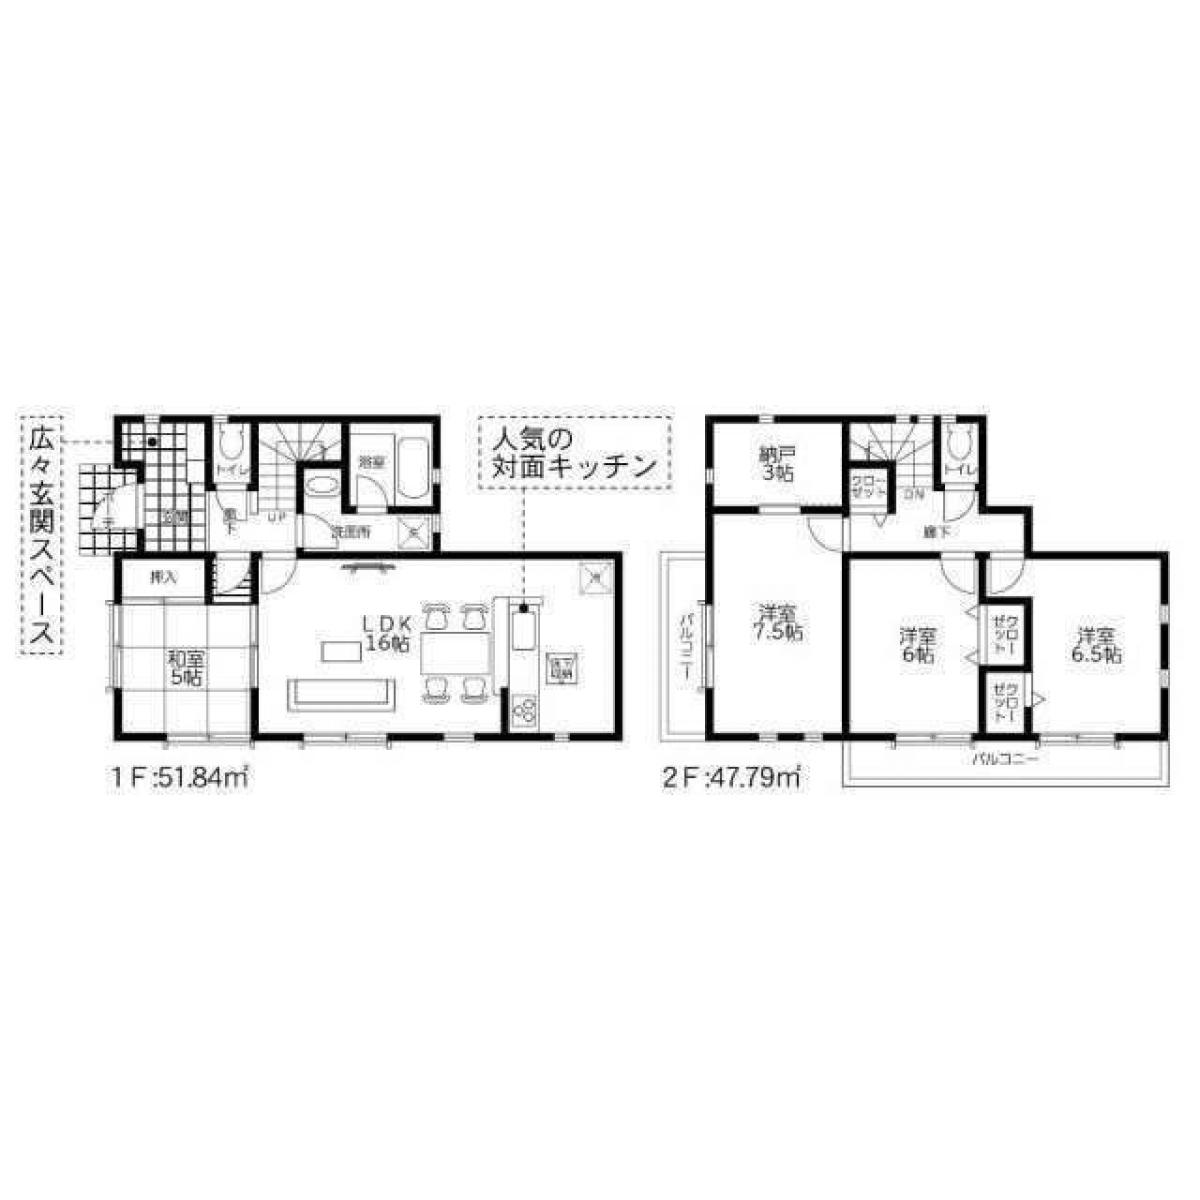 Picture of Home For Sale in Hadano Shi, Kanagawa, Japan